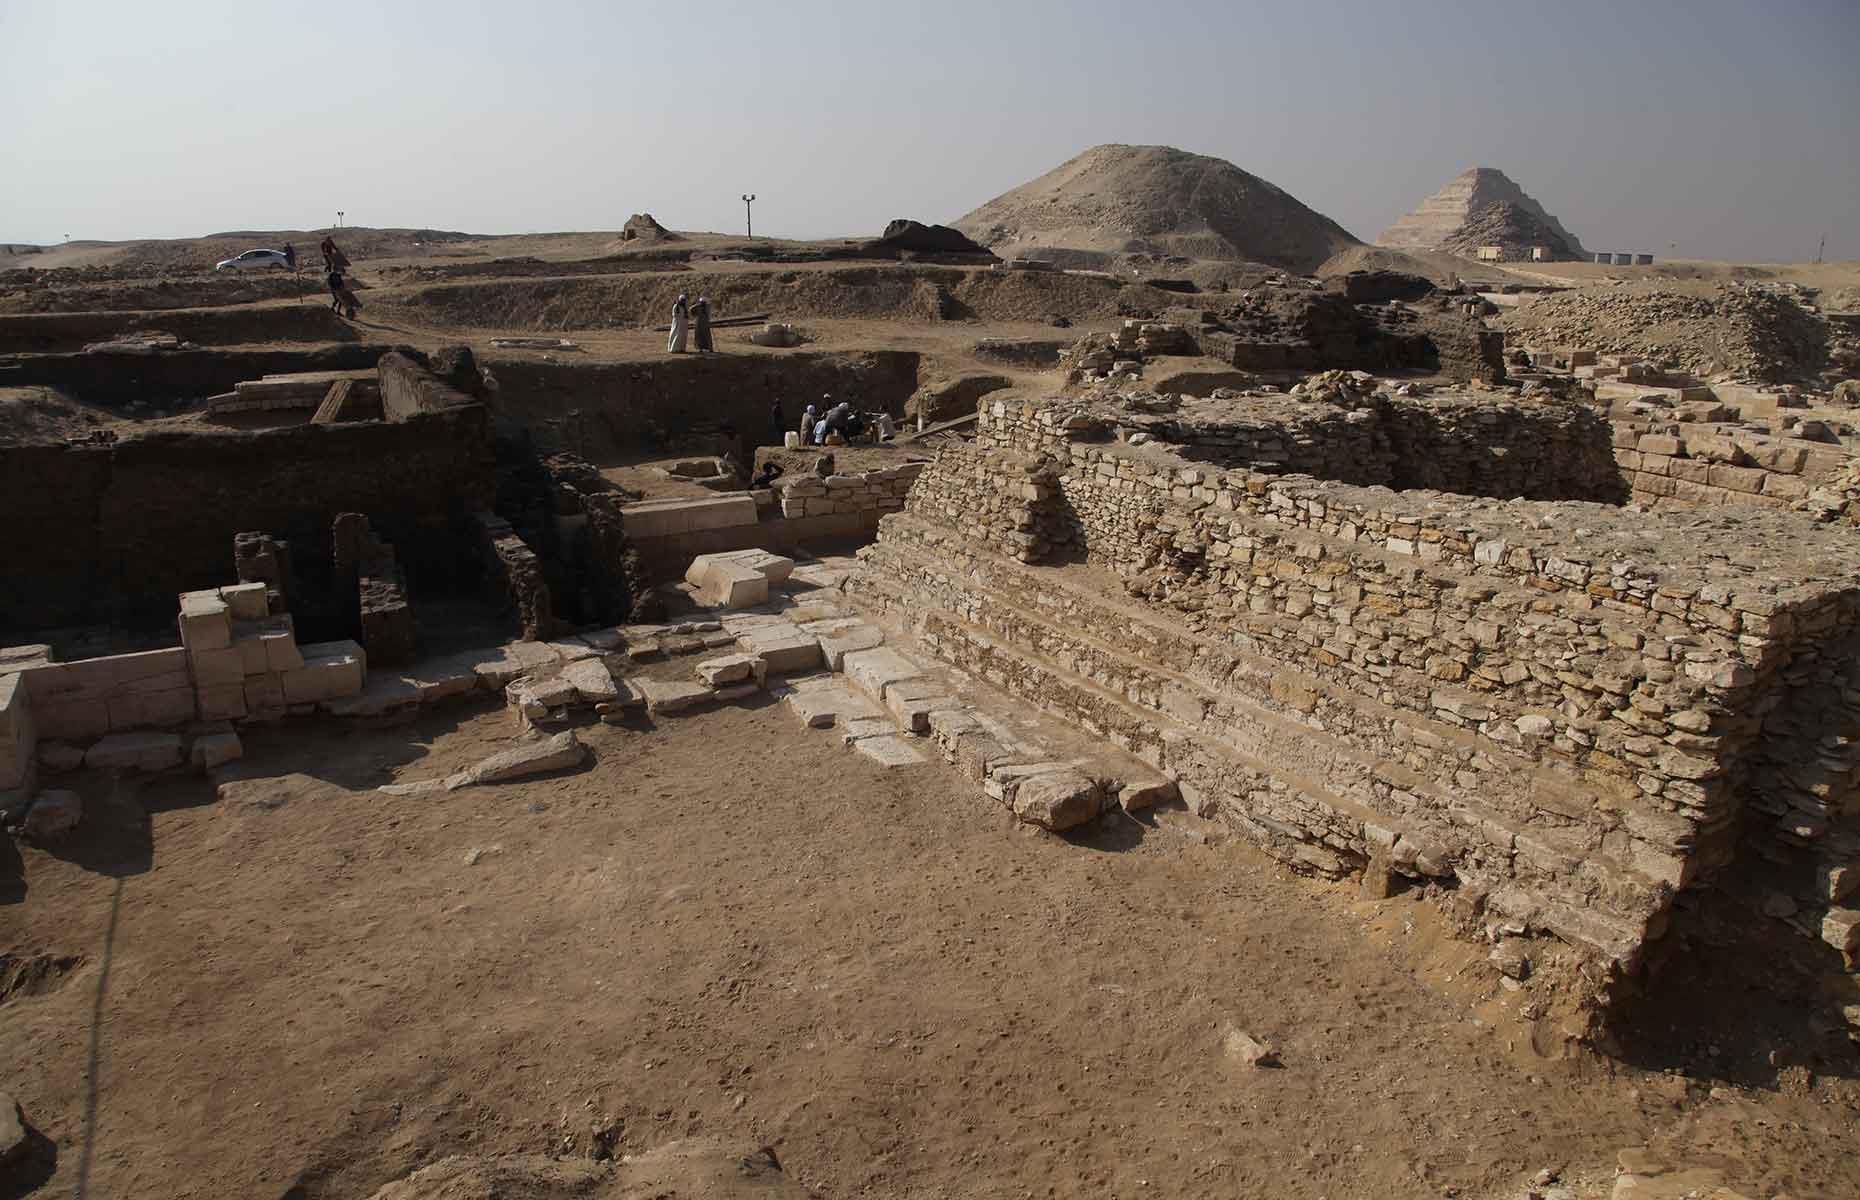 <p>At the same excavations, archaeologists also uncovered the pyramid of a previously unknown Egyptian queen named Neith. Pictured here is the excavated site, with the Teti and Djoser pyramids visible in the background. Neith was likely named after the Egyptian goddess of creation, wisdom, weaving and war, as well as being worshipped as a funerary goddess.</p>